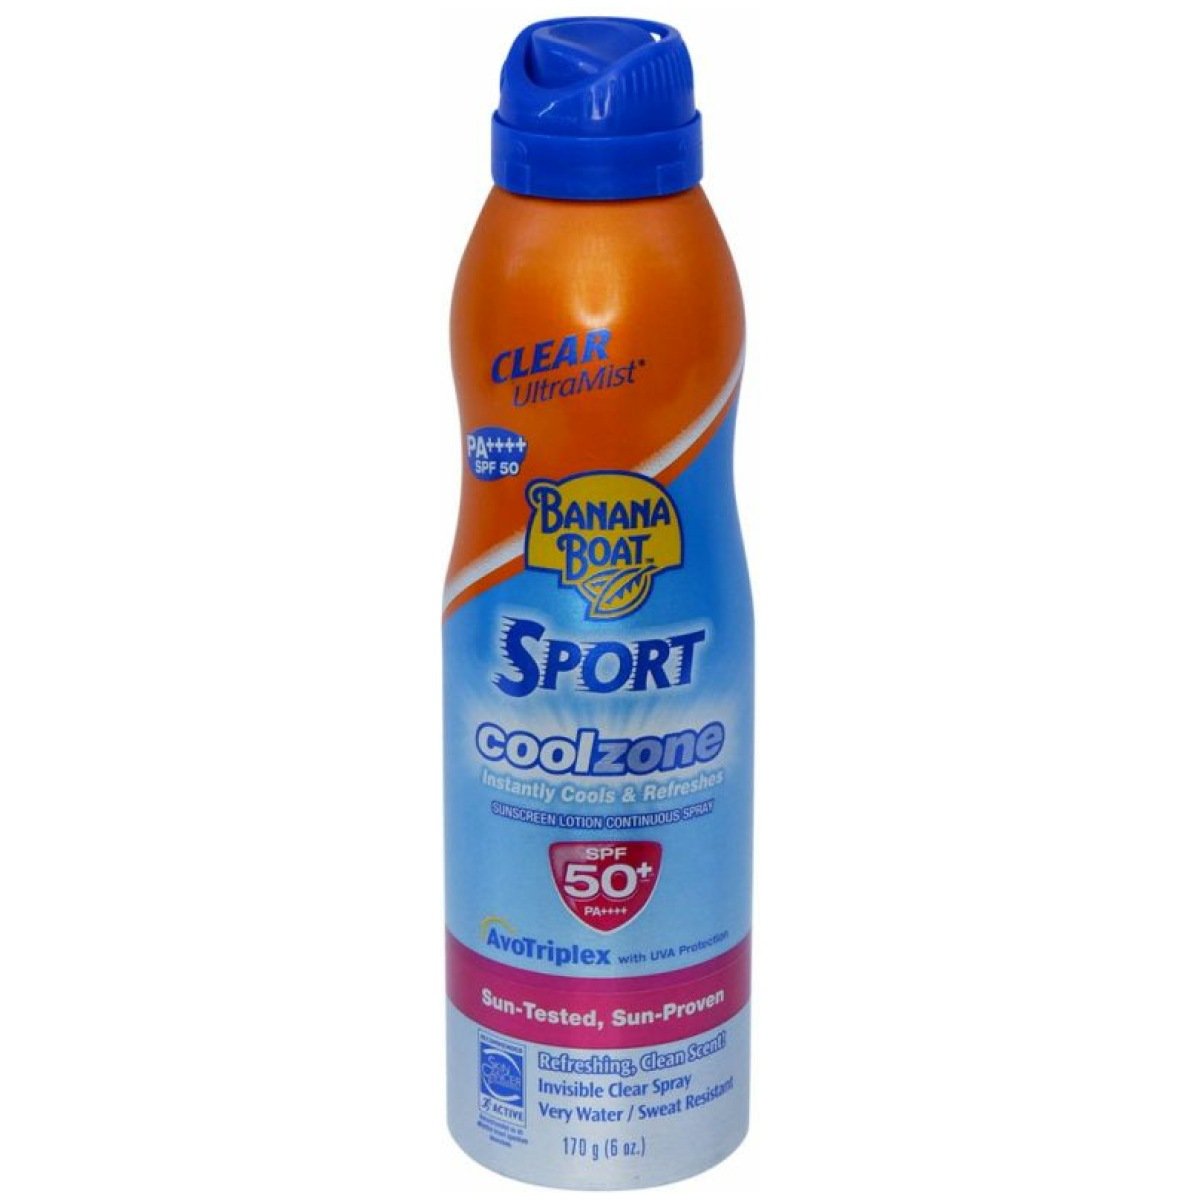 Banana Boat Sport Cool Zone Sunscreen SPF50 + Continuous Spray 170G